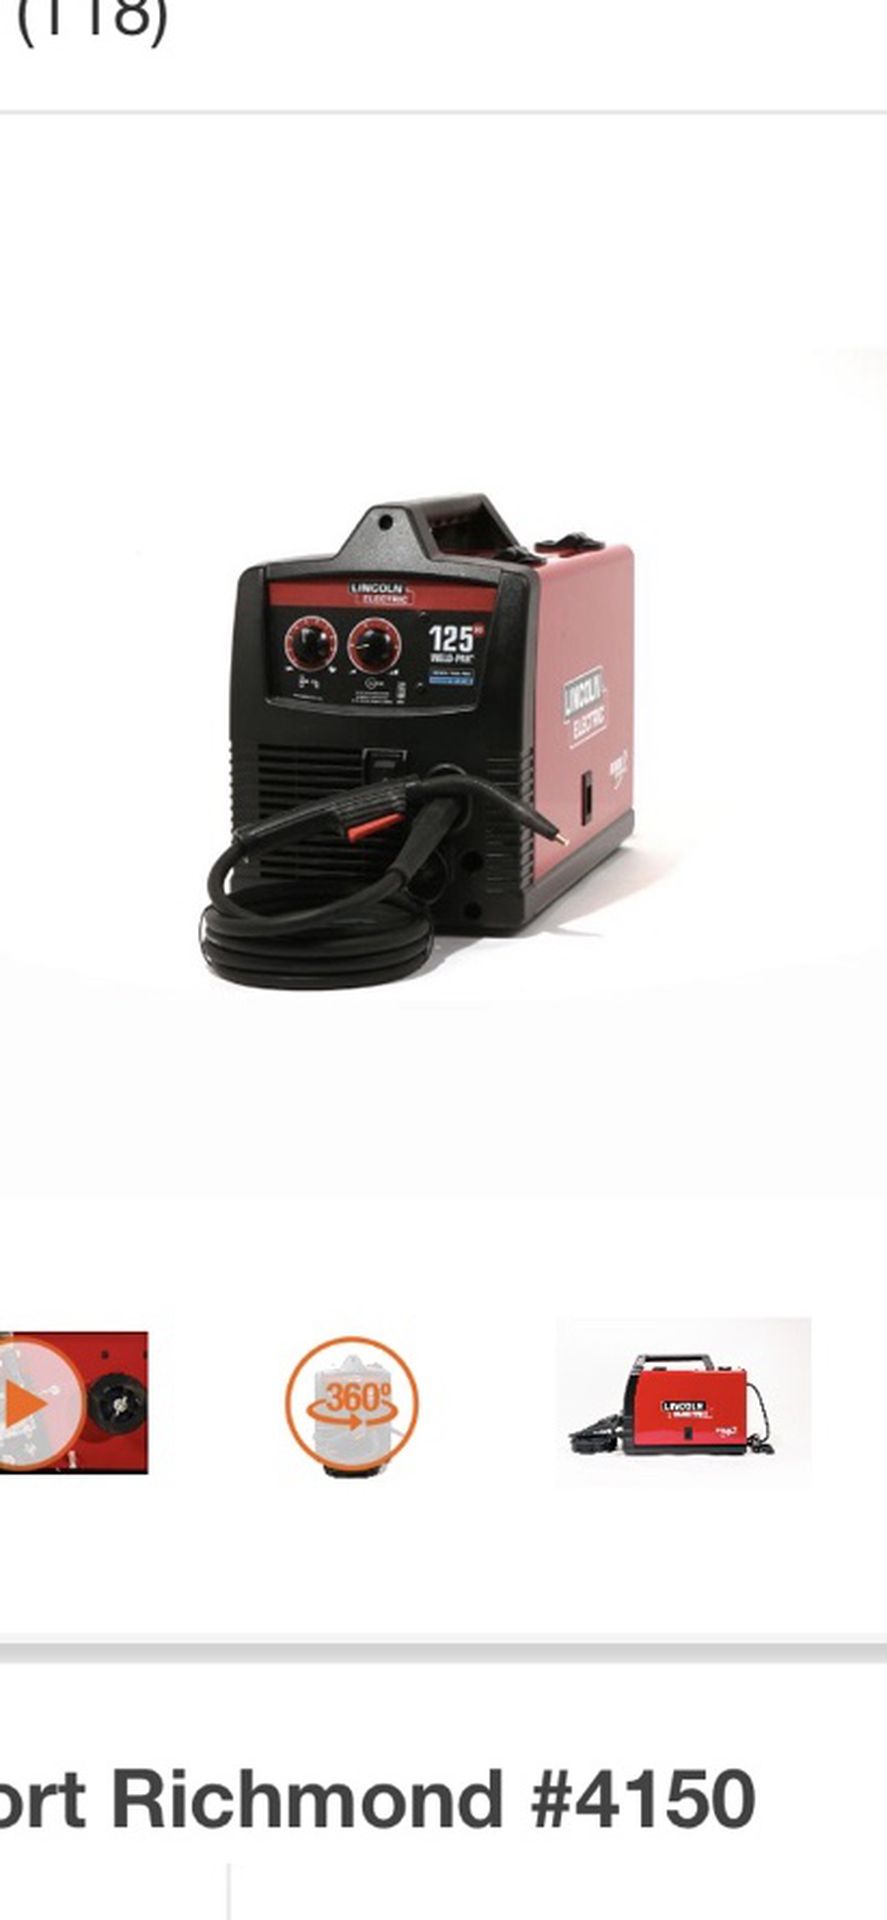 Lincoln Electric 125 Amp Weld-Pak 125 HD Flux-Cored Welder with Magnum 100L Gun, Flux-Cored Wire, 115V